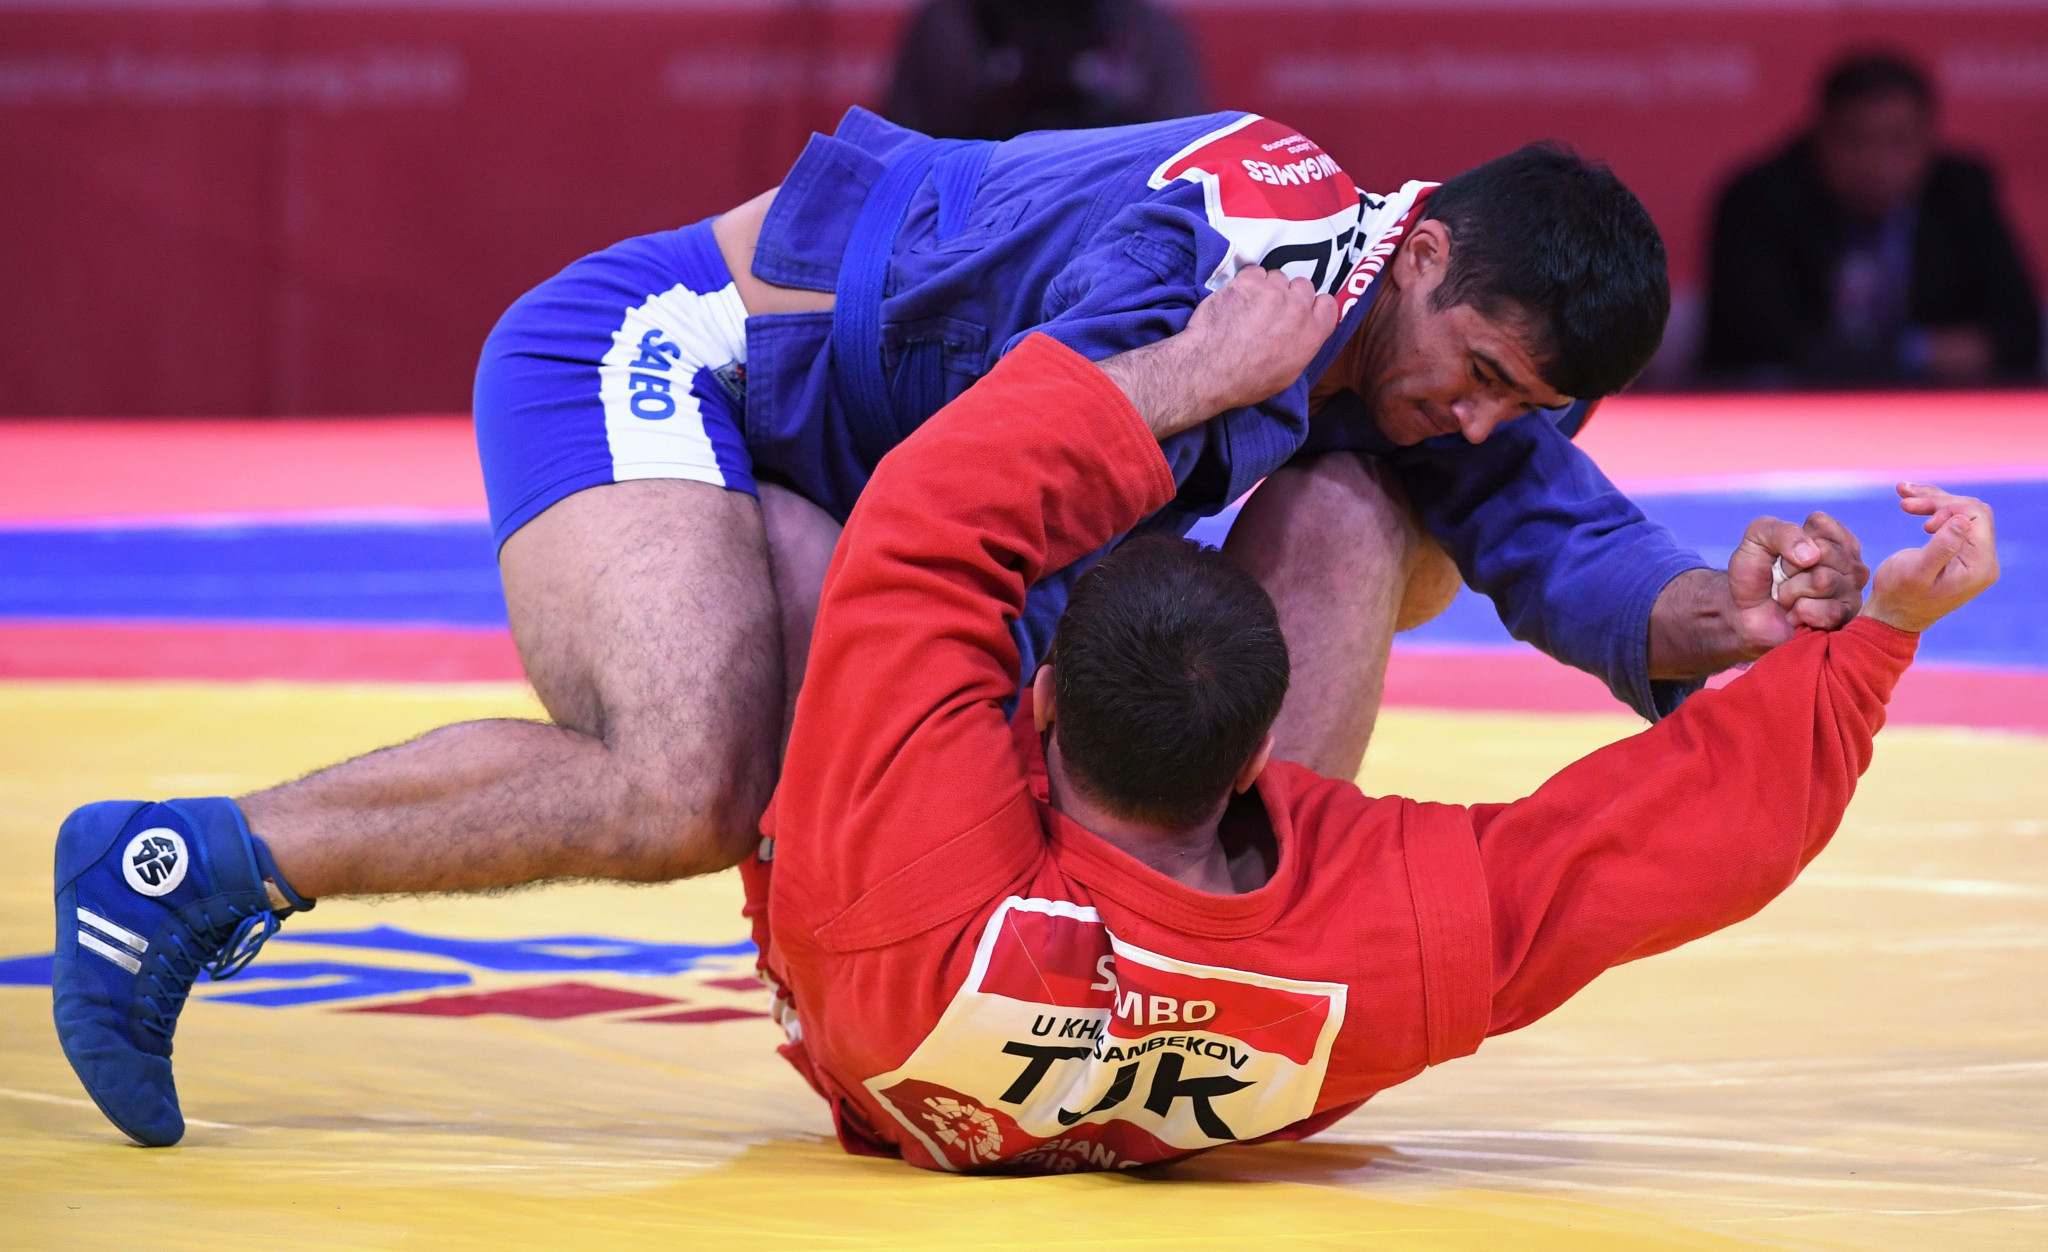 A decision on the World Sambo Championships will be made by the end of September ©Getty Images